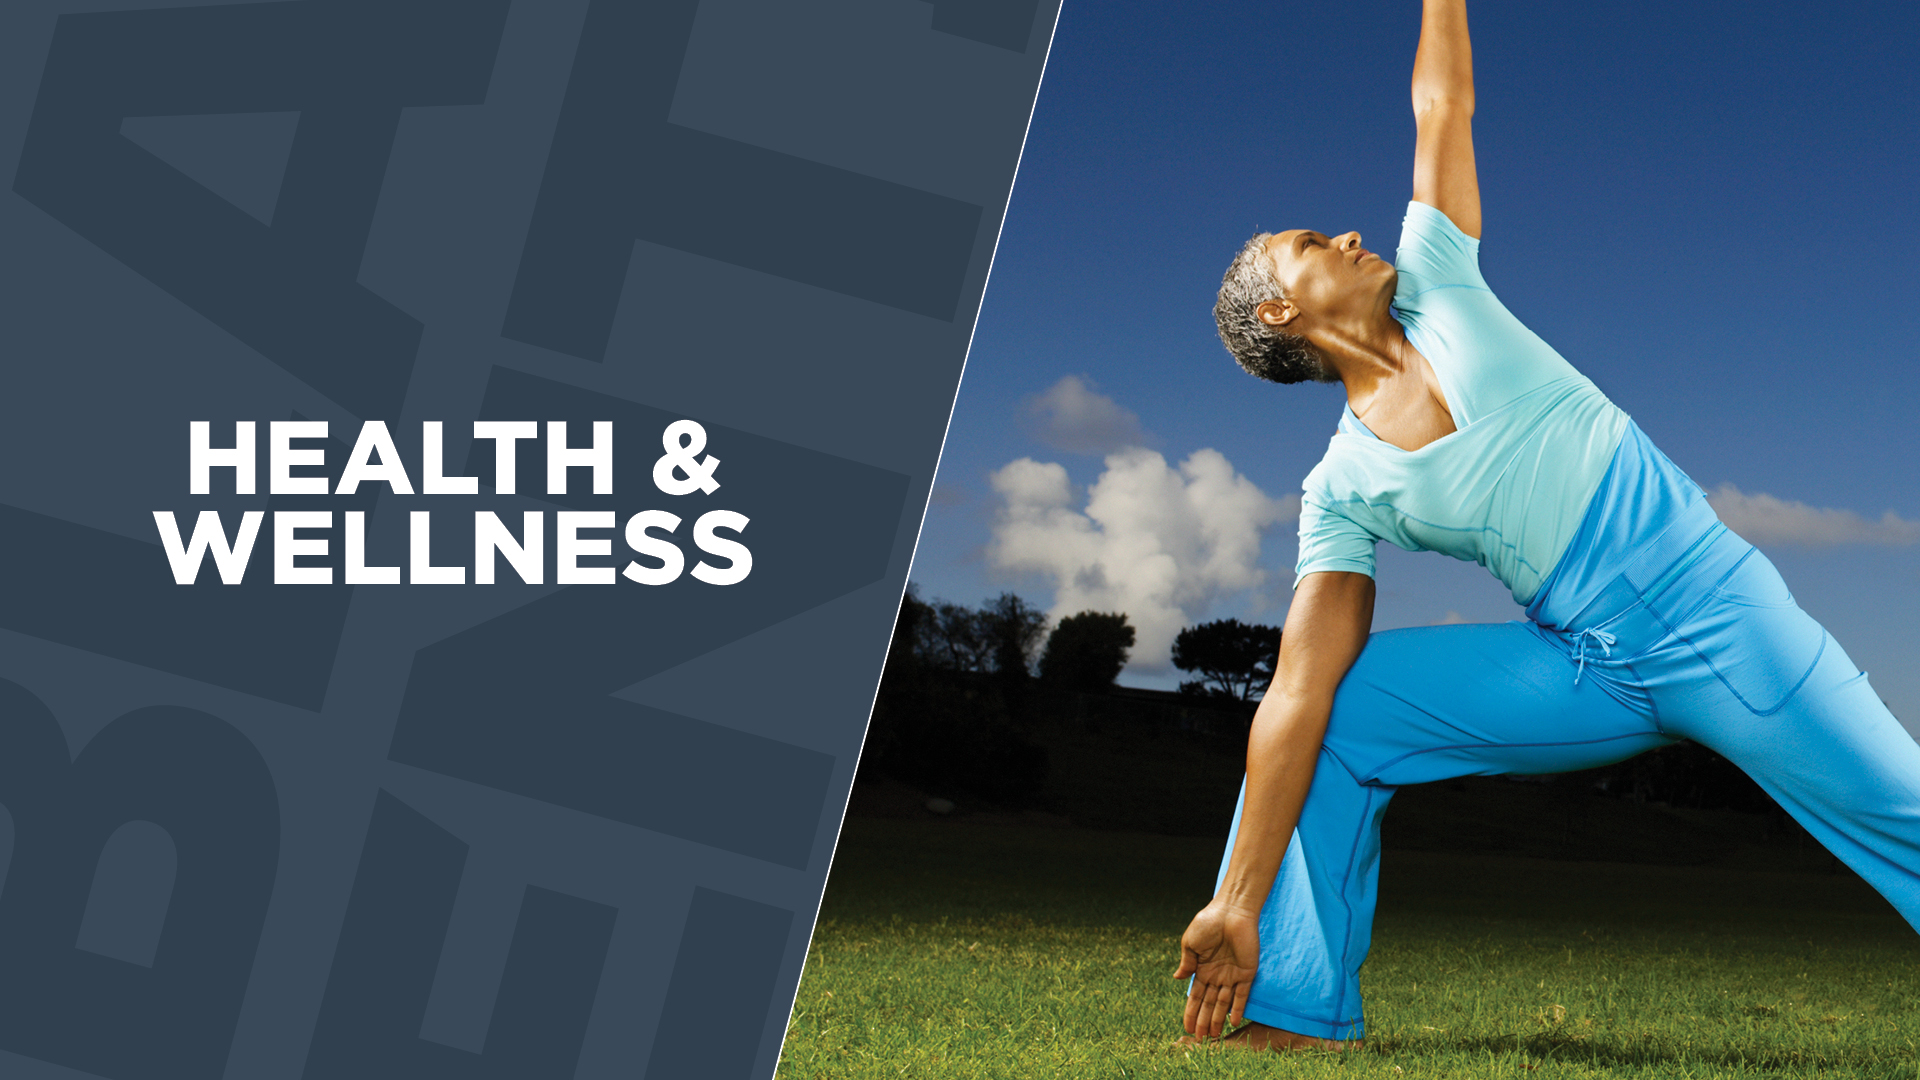 Your Health is Your Wealth! Get Fit With These 5 Practices